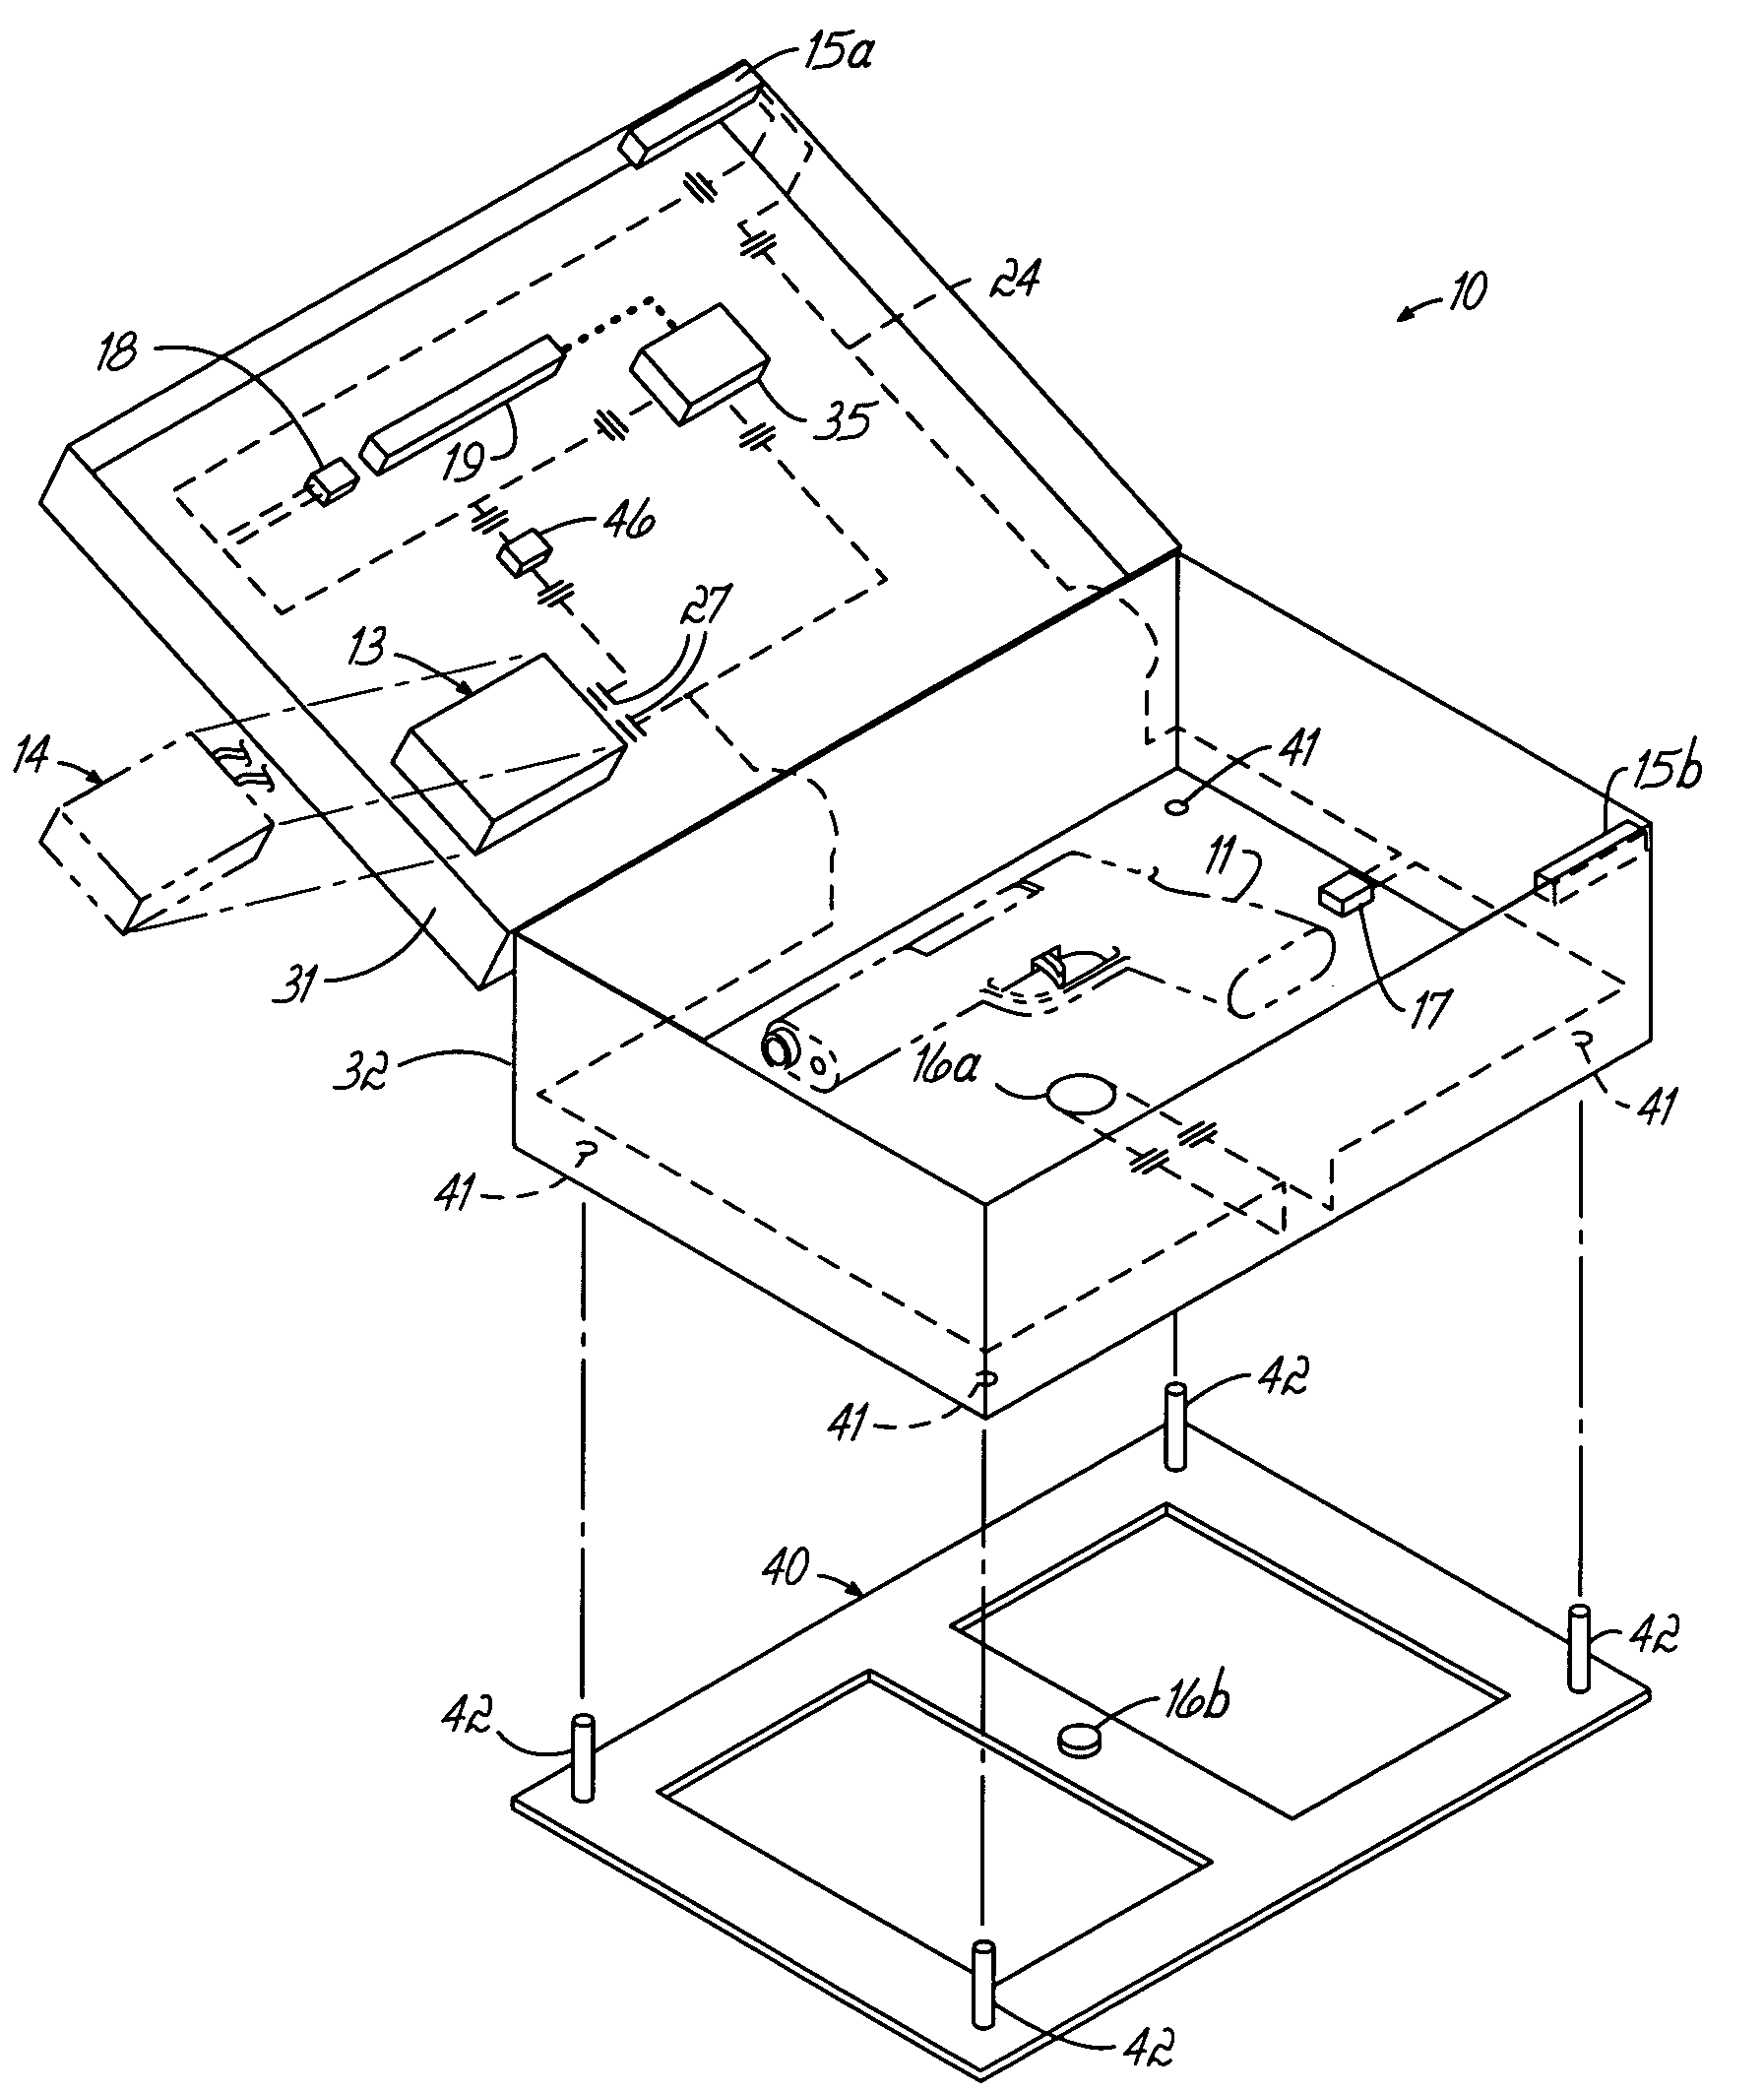 Method and apparatus for securing firearms and other valuables in an alarm protected facility